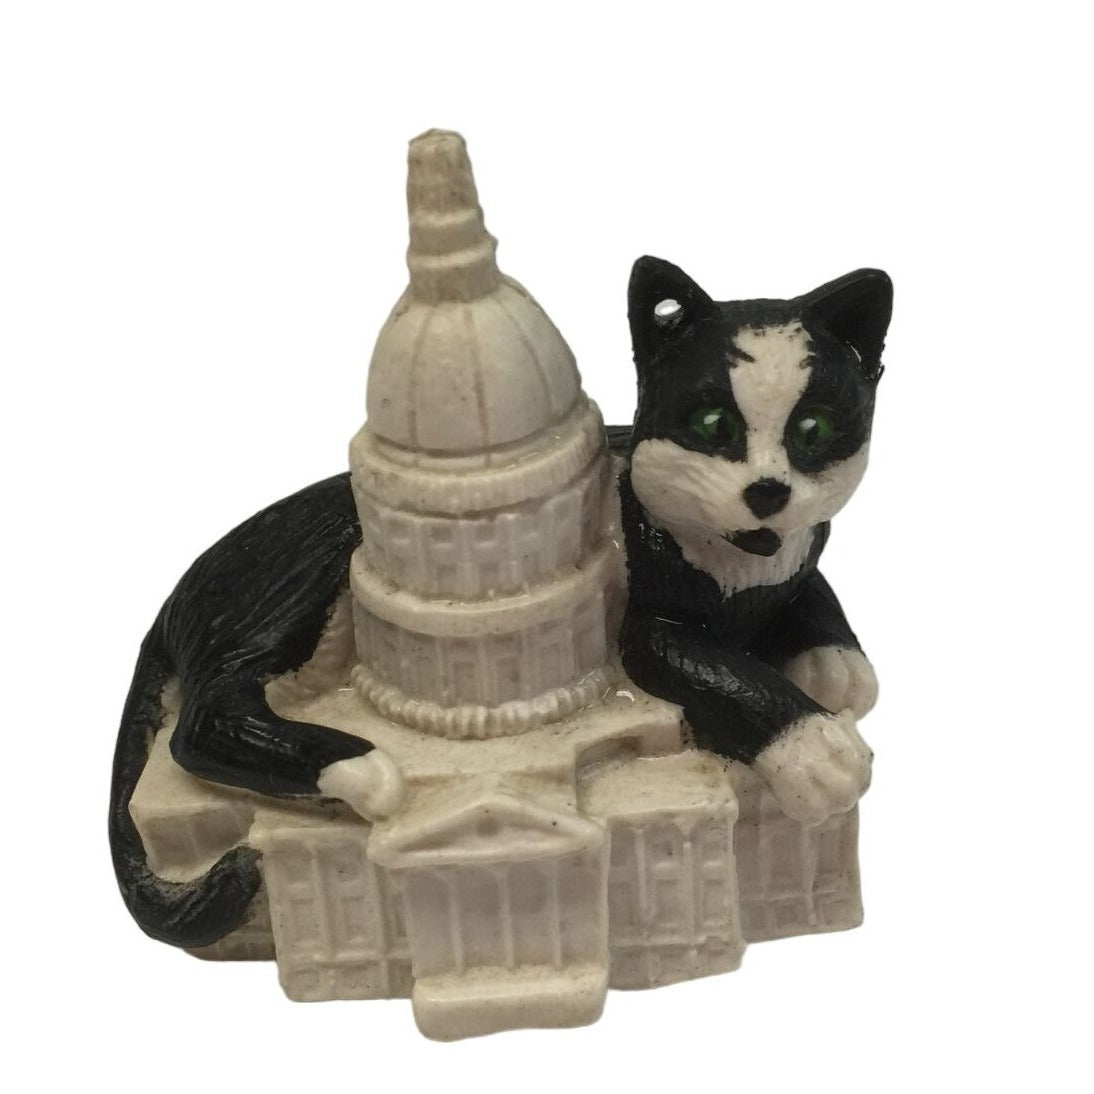 Vintage 1993 For Street Kids Cat sitting on A White House/Building Figurine